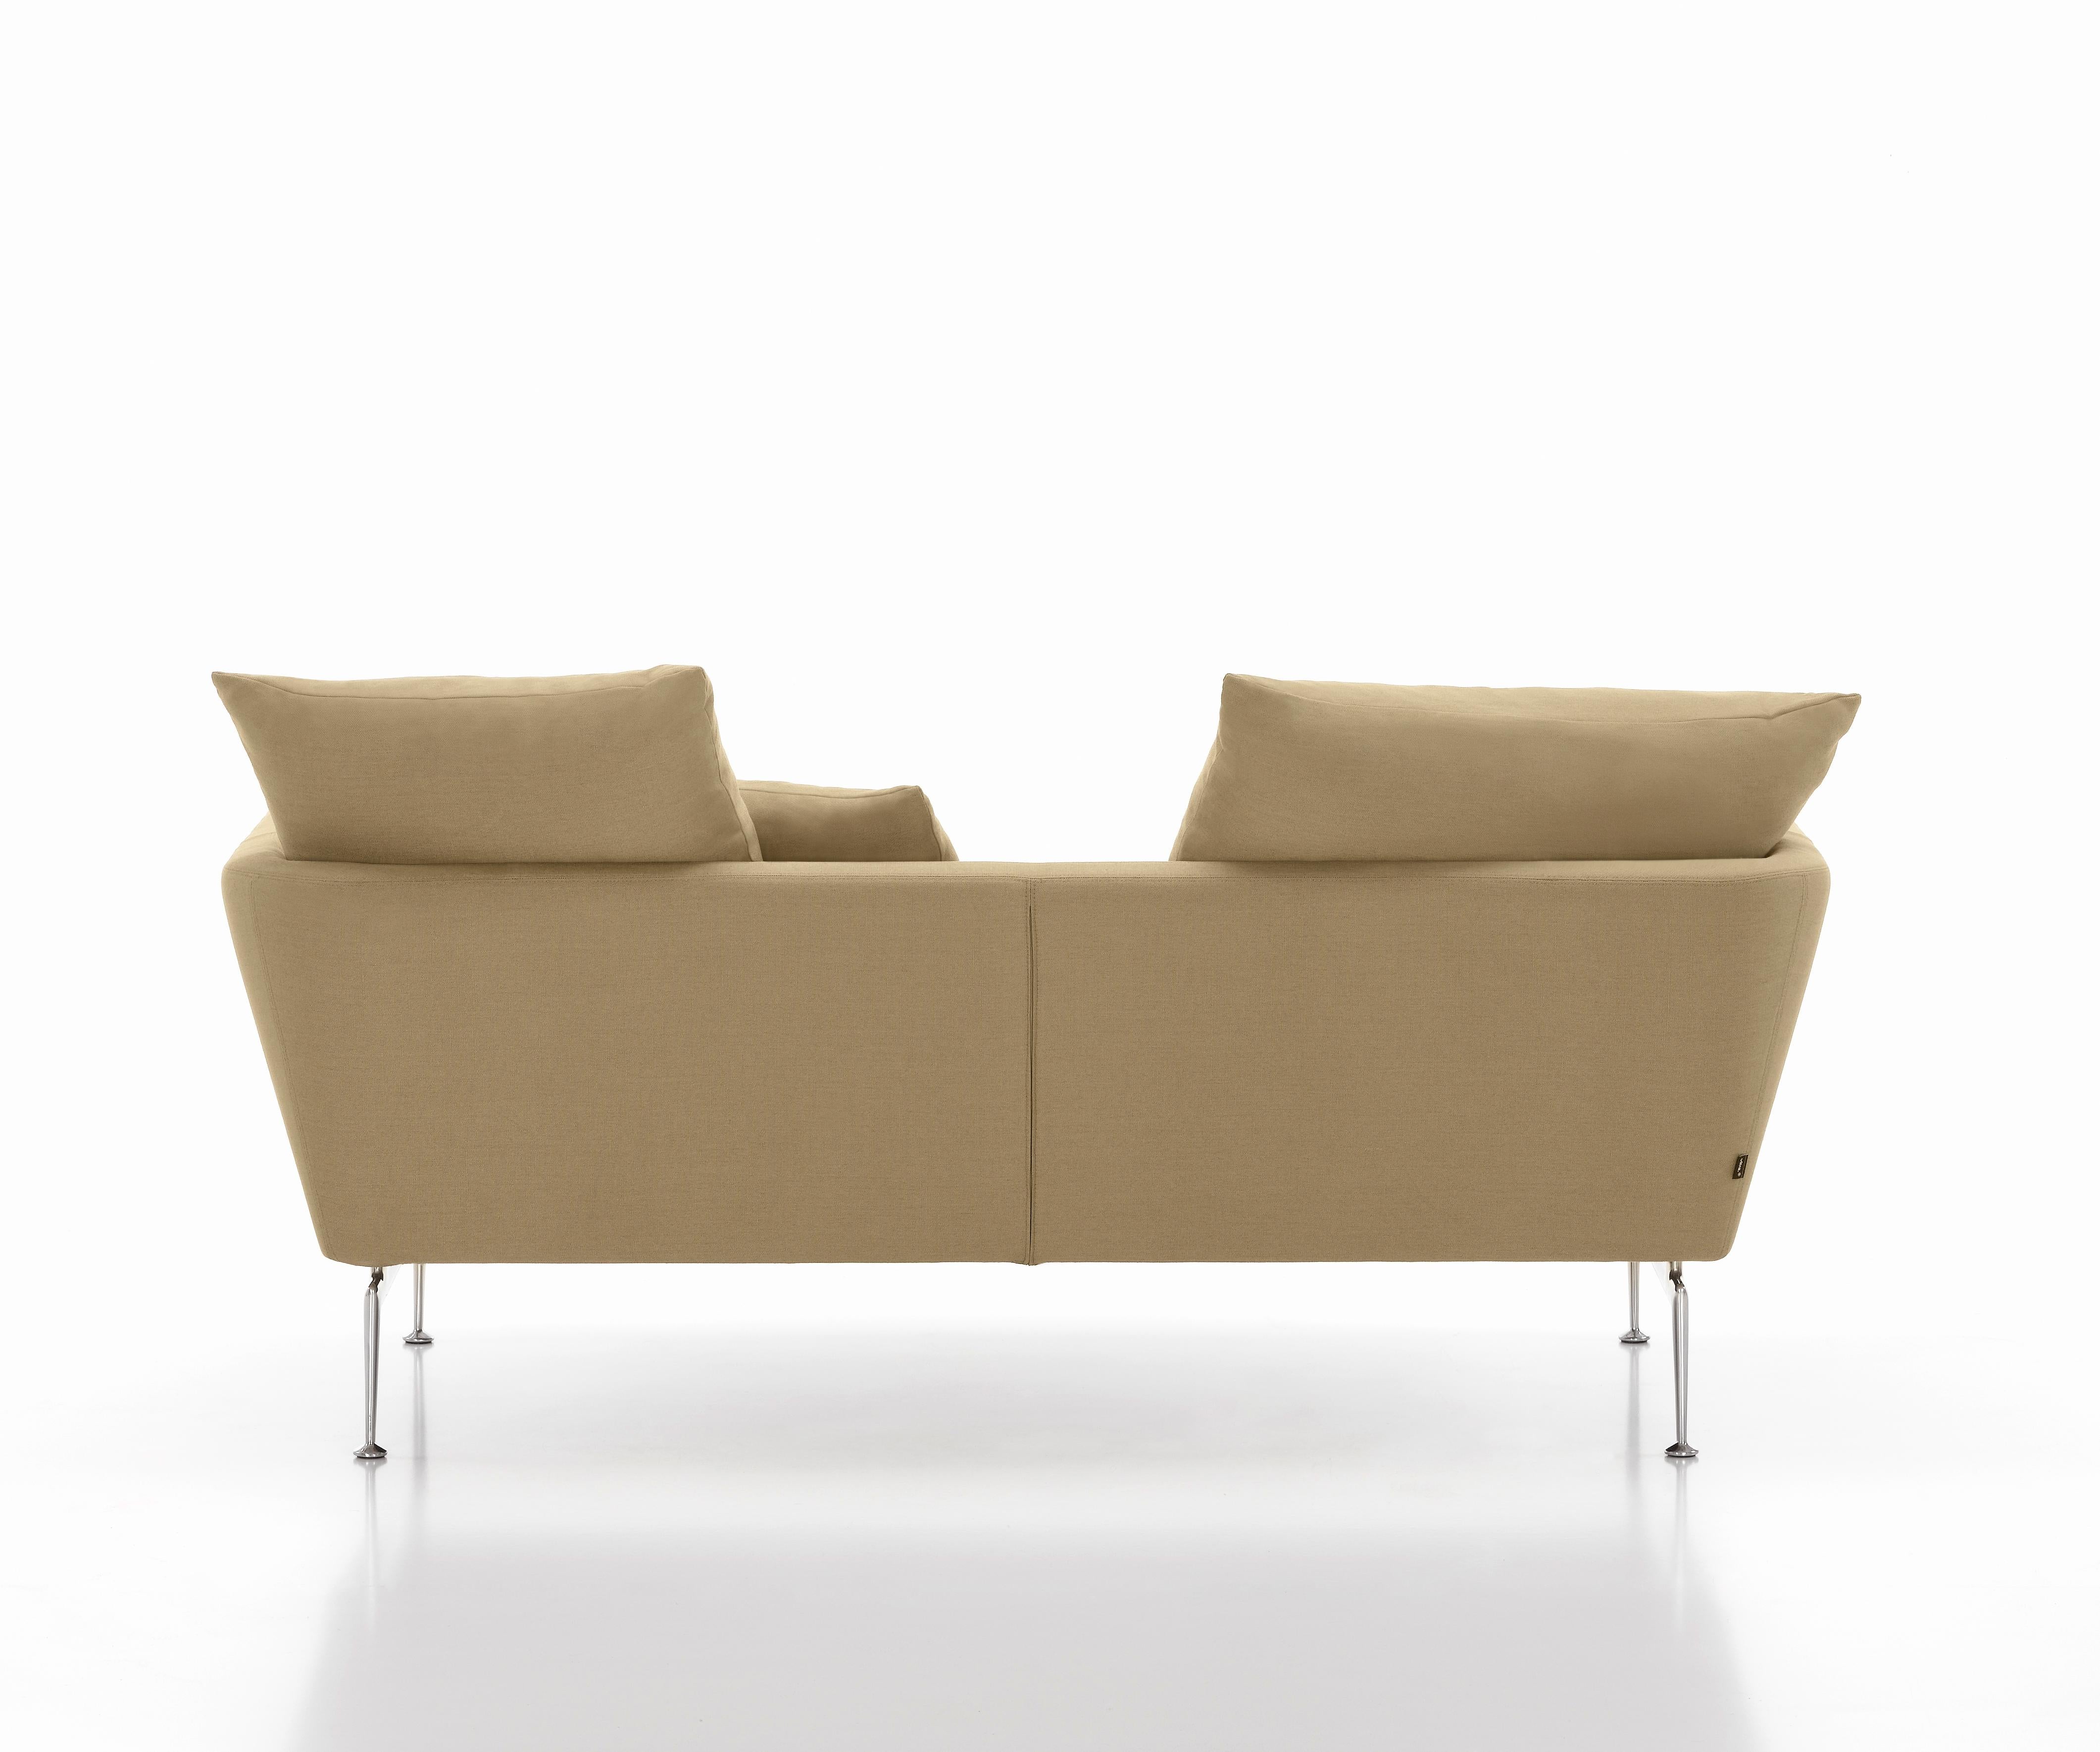 Vitra Suita Sofa Two-Seat in Parchment Olimpo by Antonio Citterio (Moderne) im Angebot